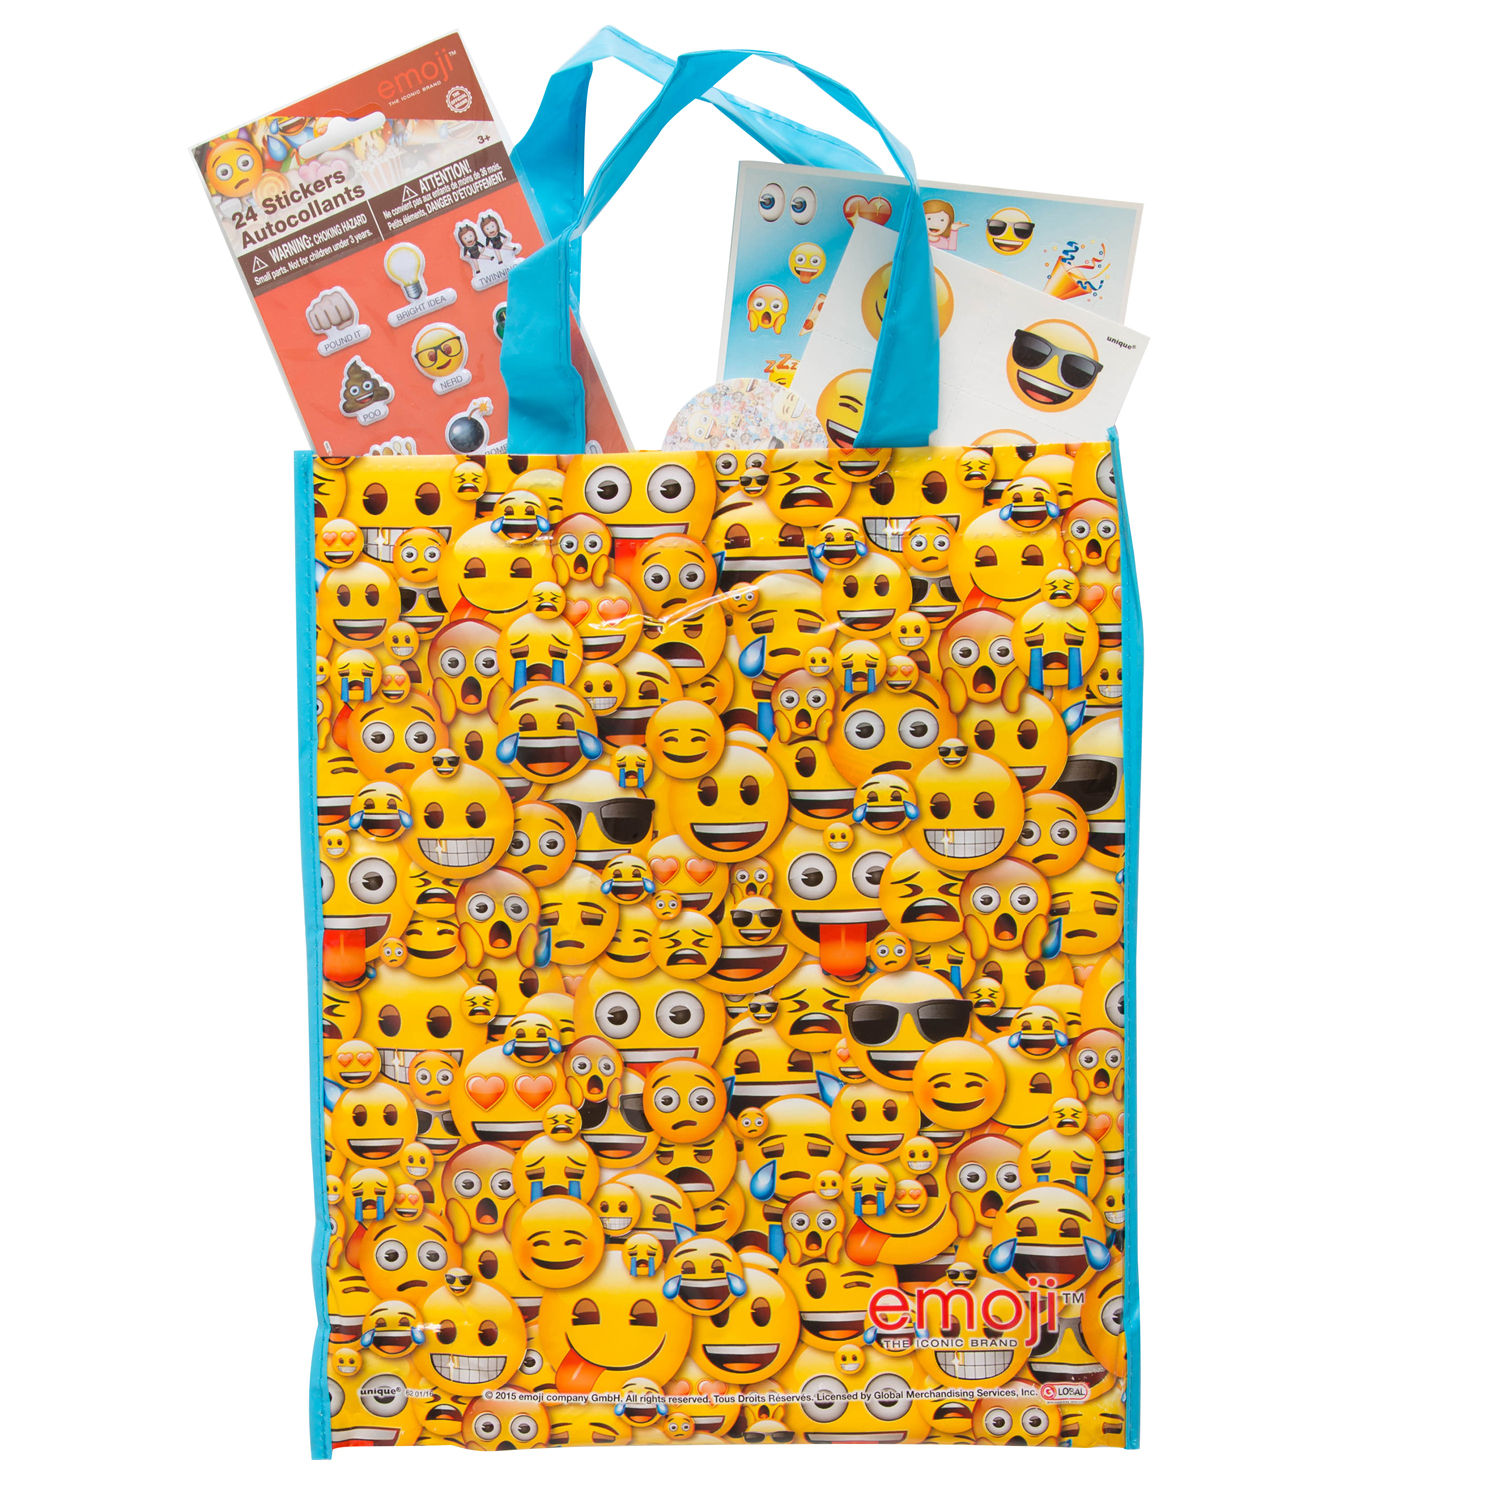 Unique Industries Emoji Birthday Party Bags - image 2 of 3